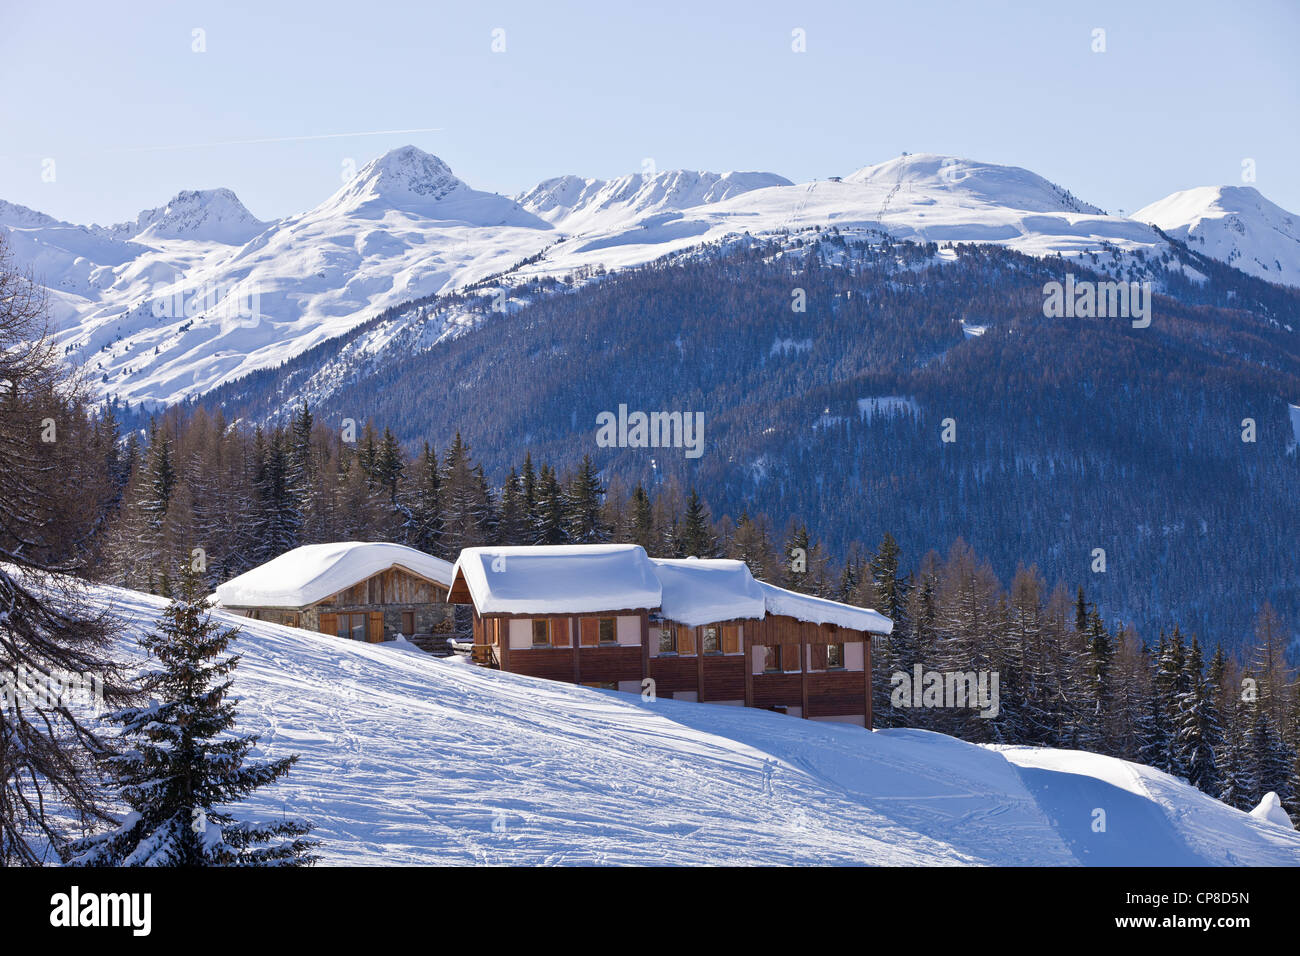 France, Savoie, Les Arcs 1800, Massif de La Vanoise, high Tarentaise valley with a view of the Cheval Noir in the center Stock Photo